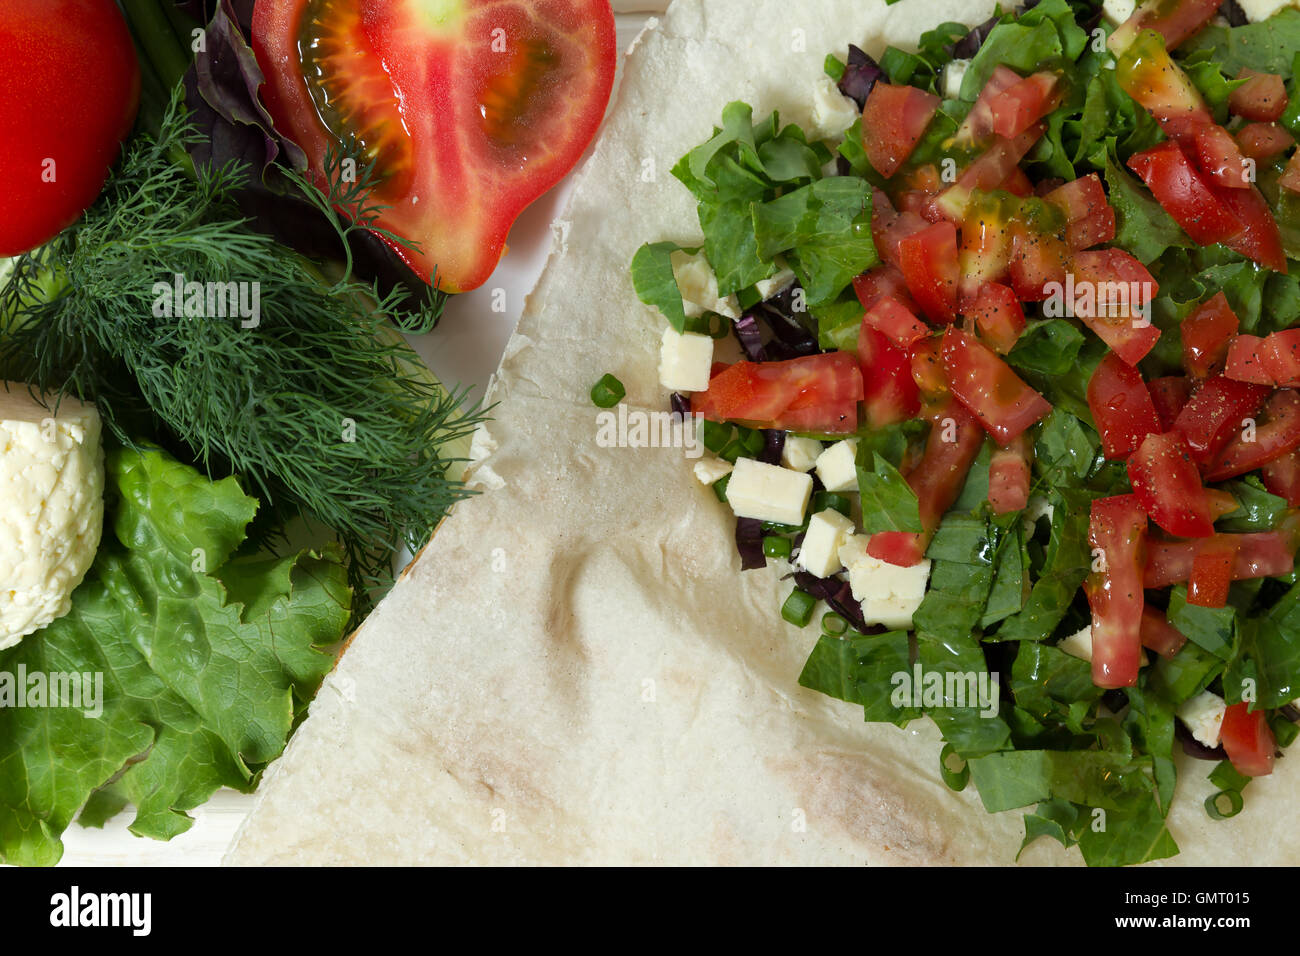 Healthy meals - organic foods Stock Photo